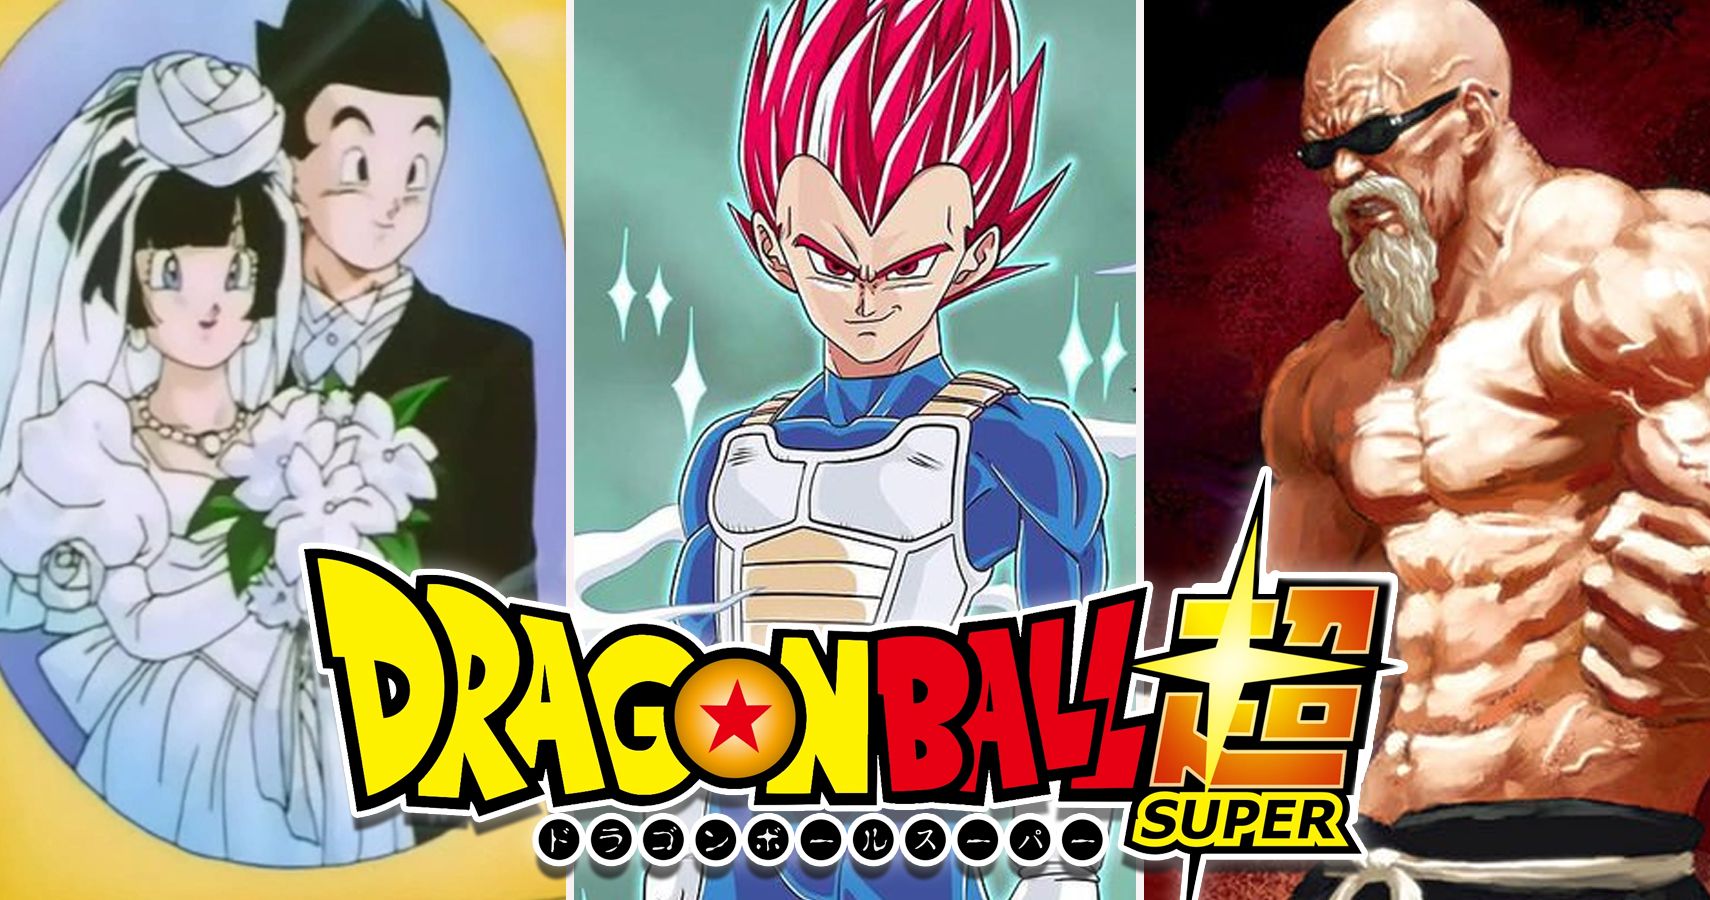 Will Oob Be Any Stronger After The Events Of DBS? • Kanzenshuu